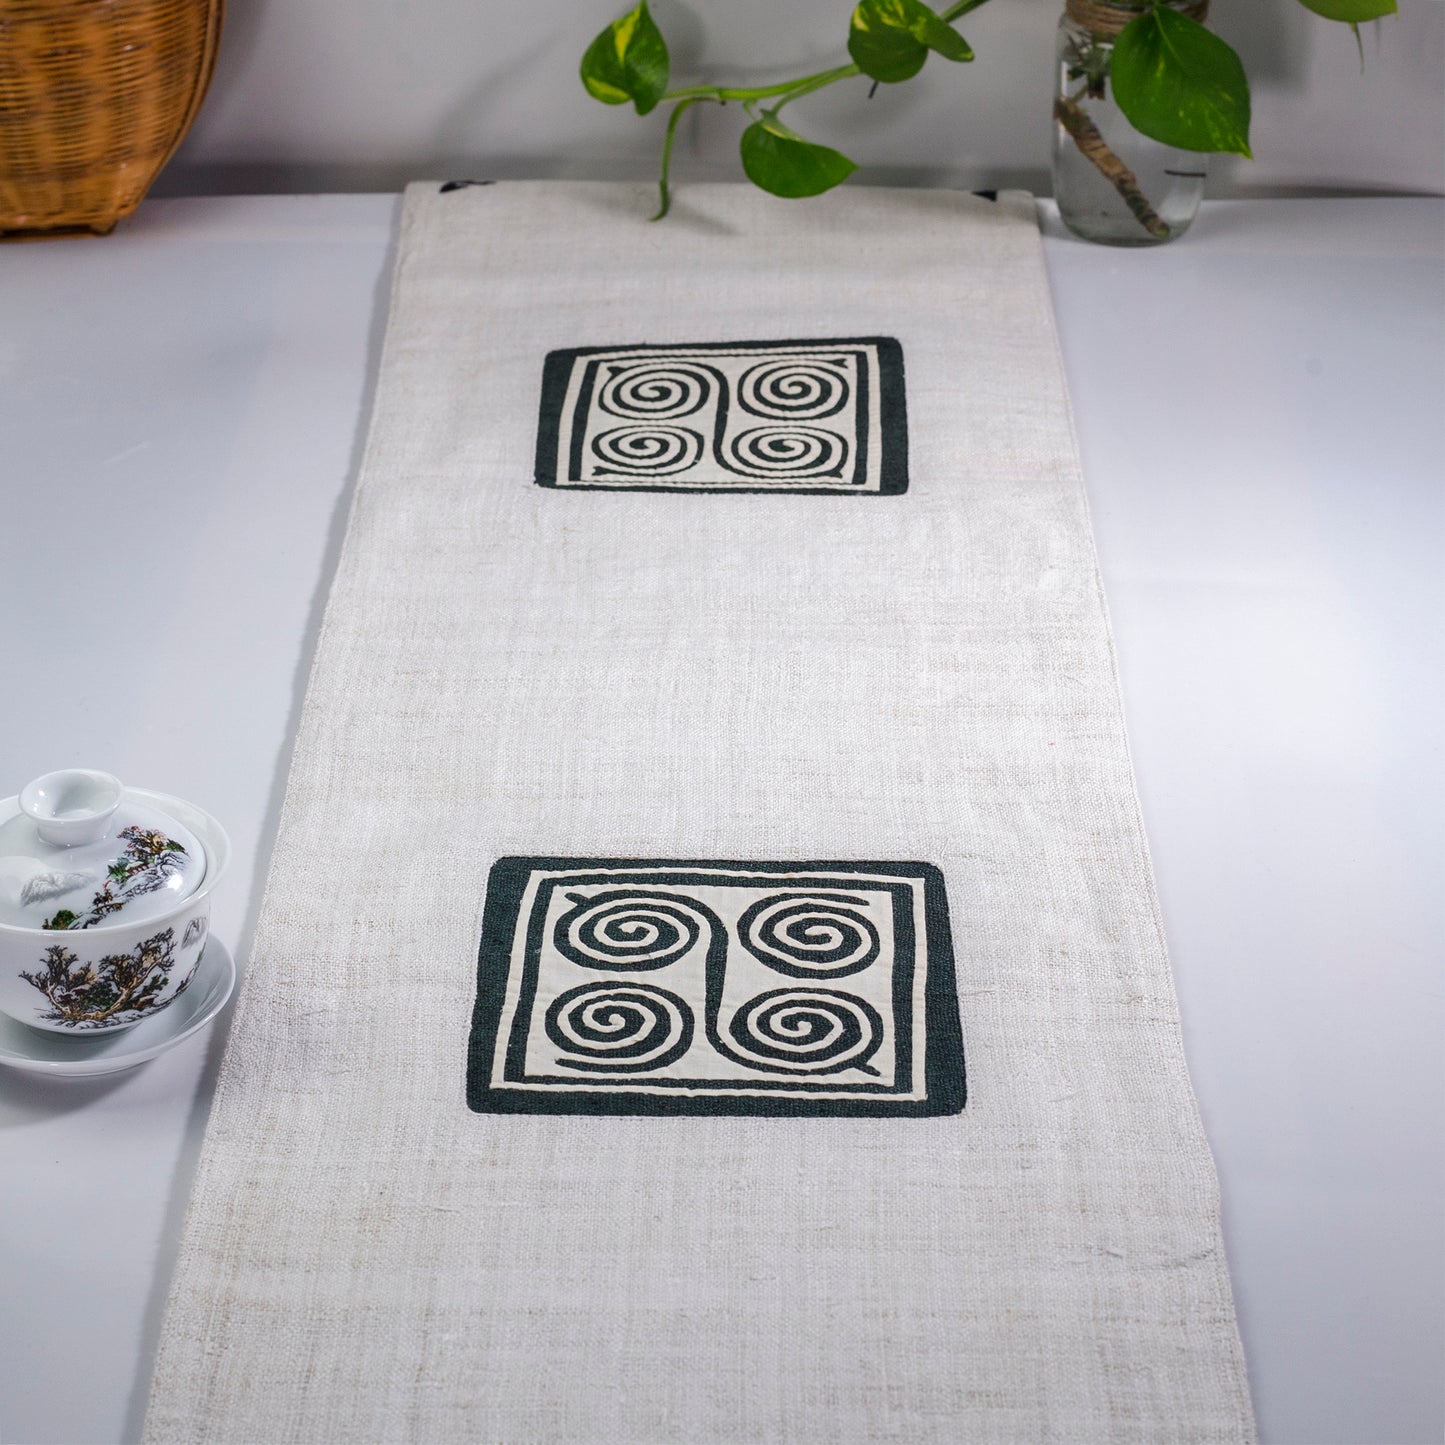 White Hemp Table Runner, unique patterns, hand-stitched details at both ends